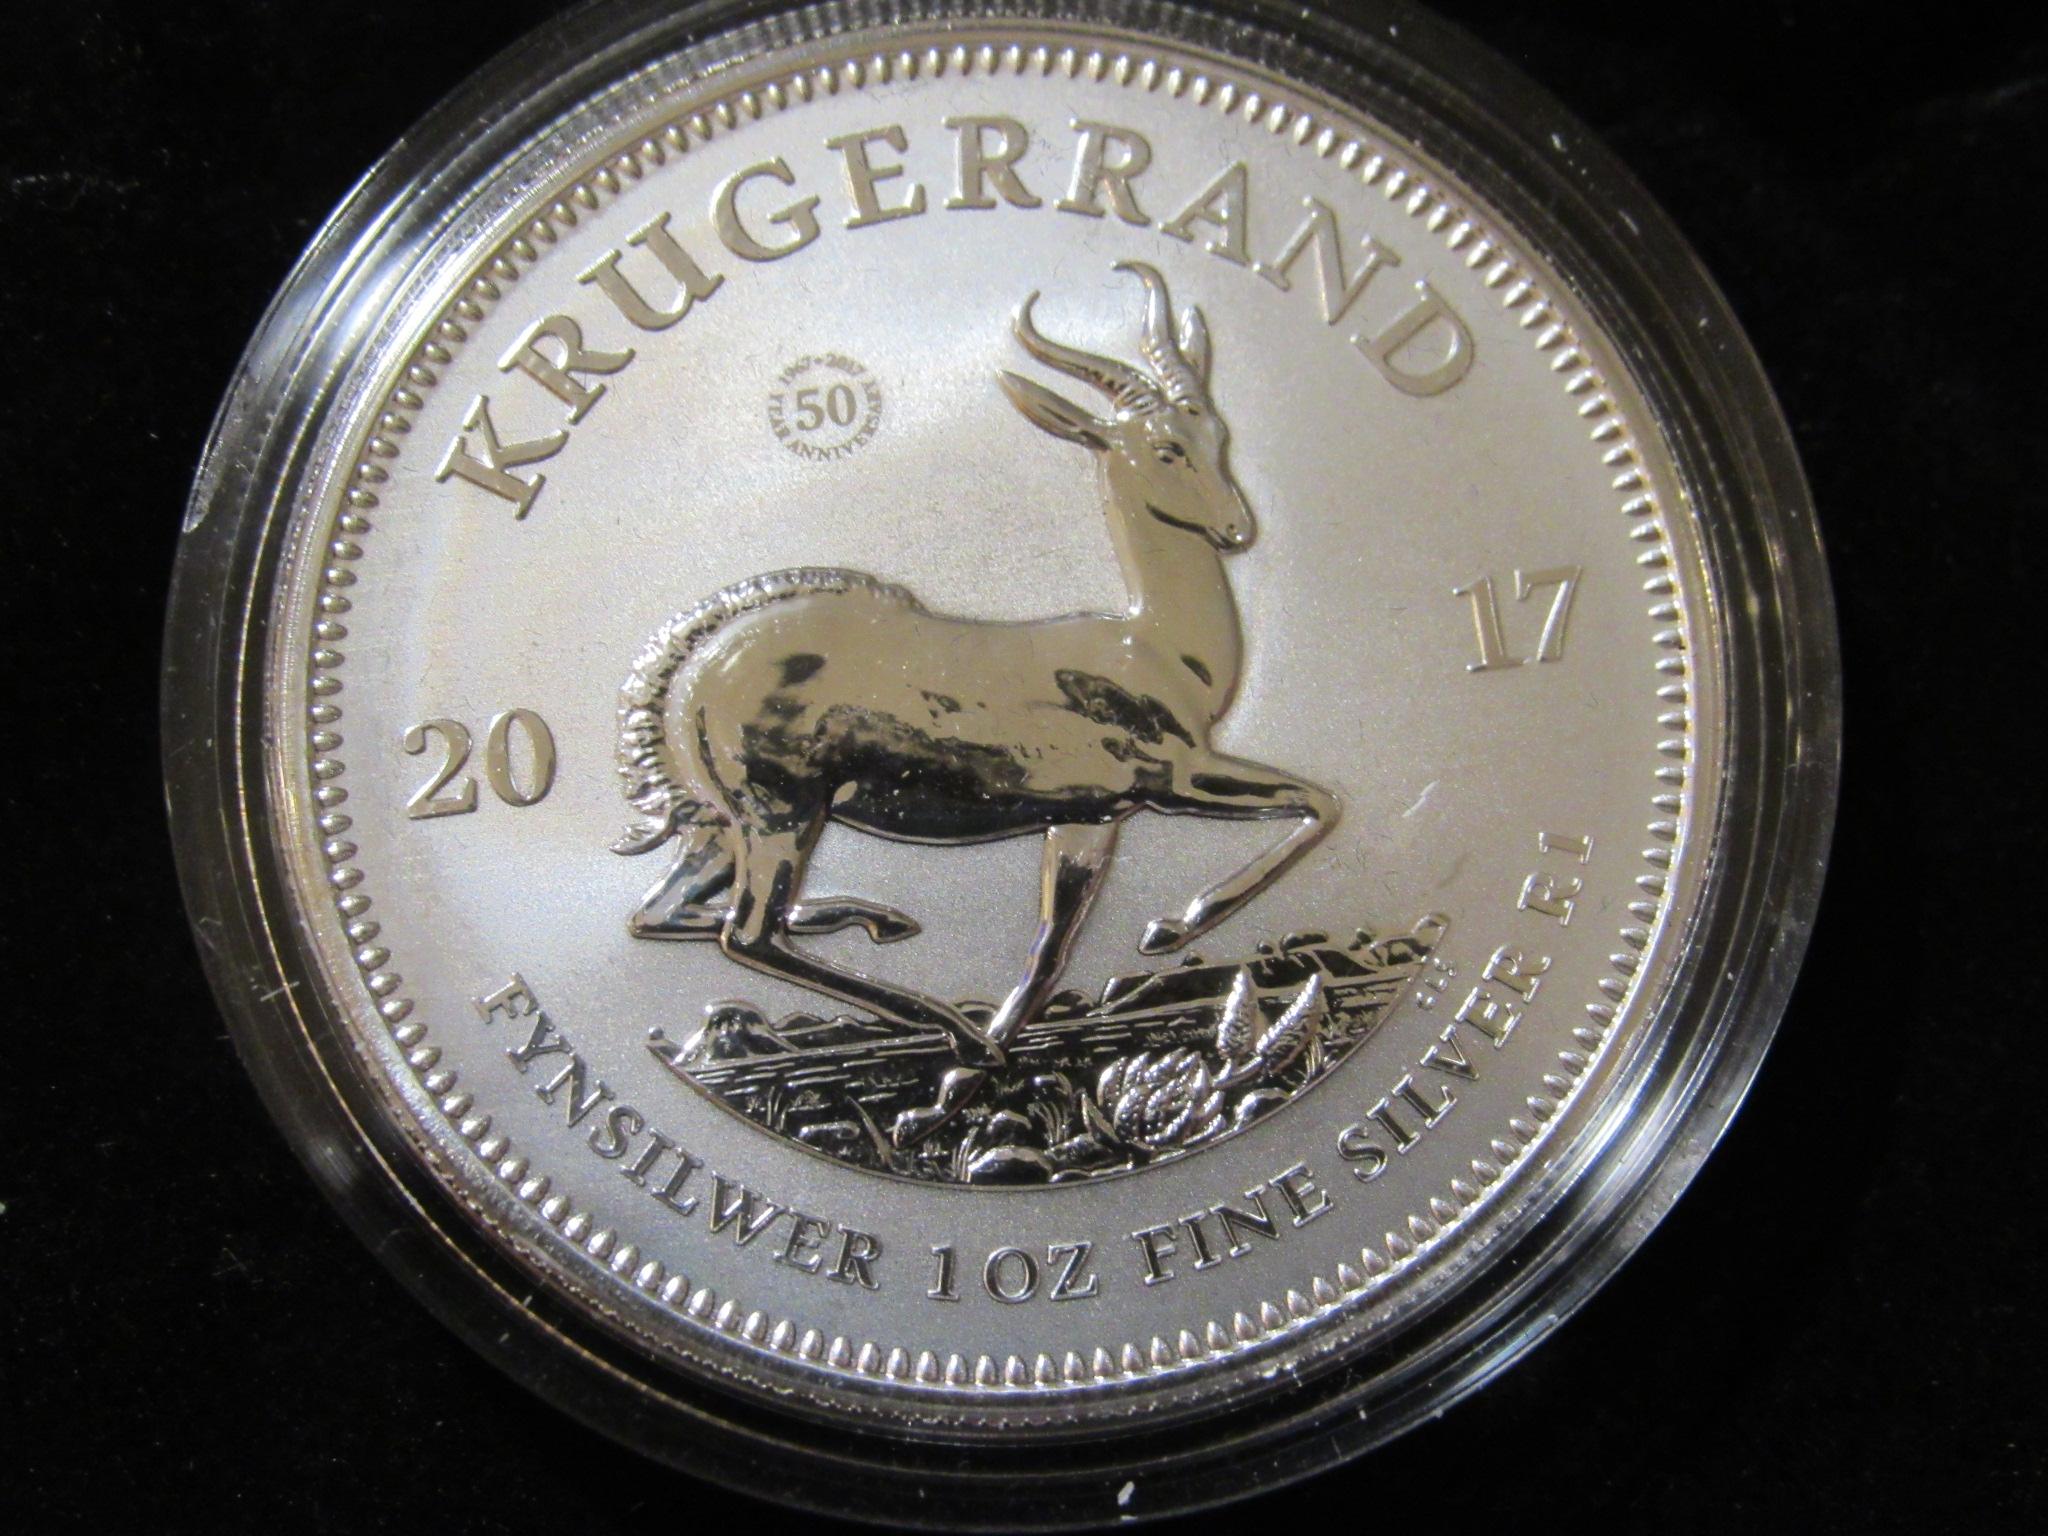 2017 South African Mint